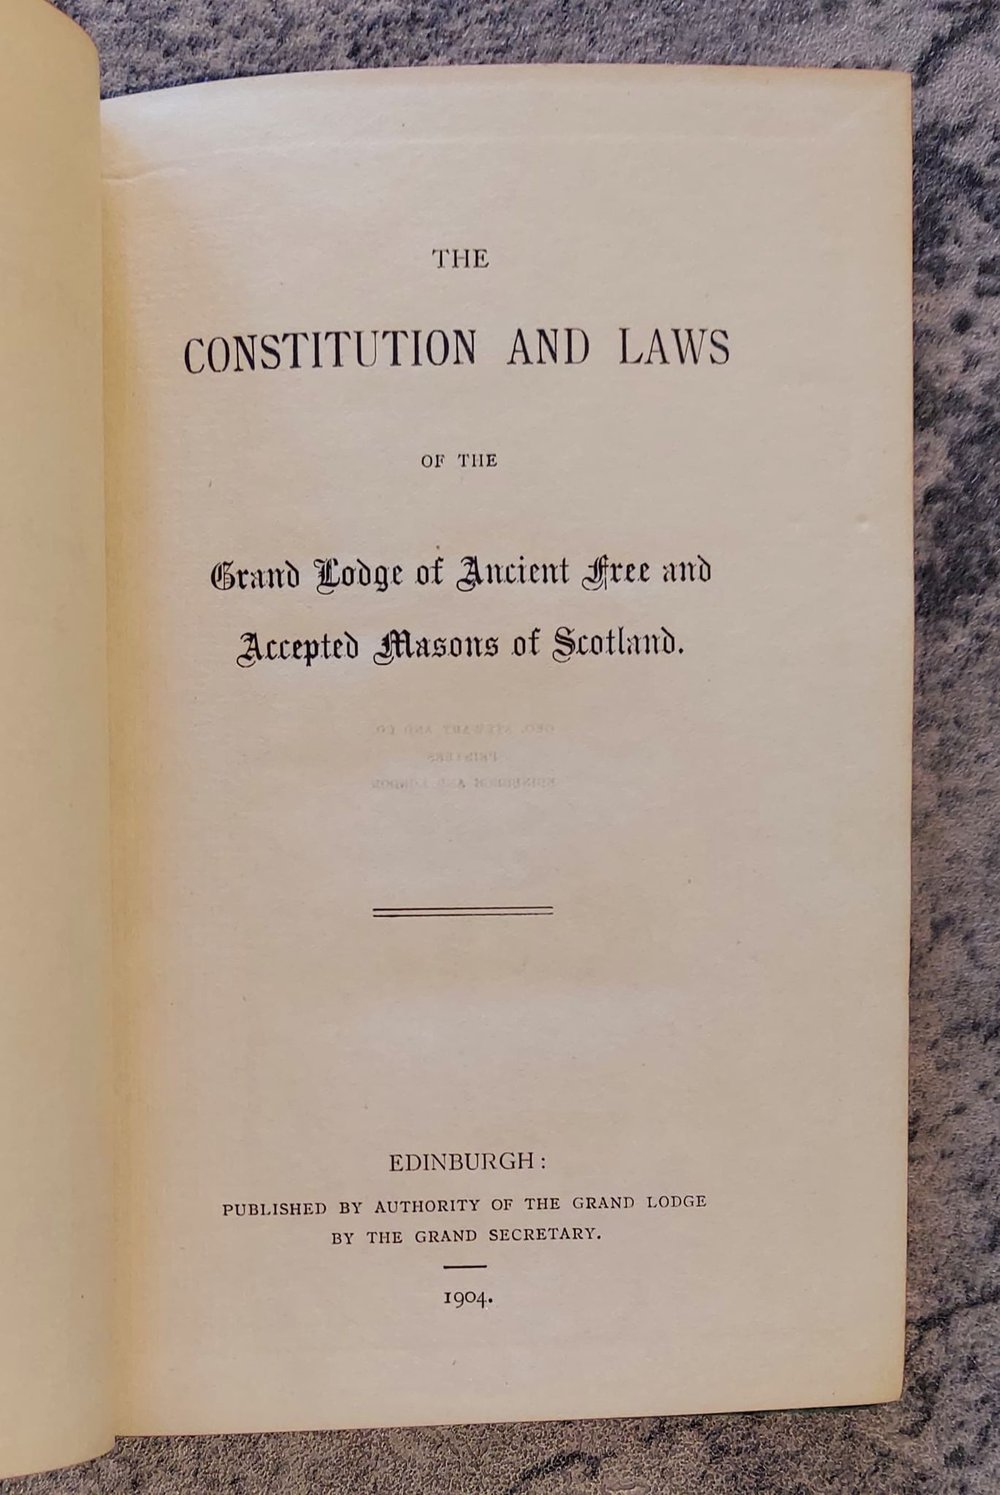 The Constitution and Laws of the Grand Lodge of Ancient Free and Accepted Masons of Scotland - 1904